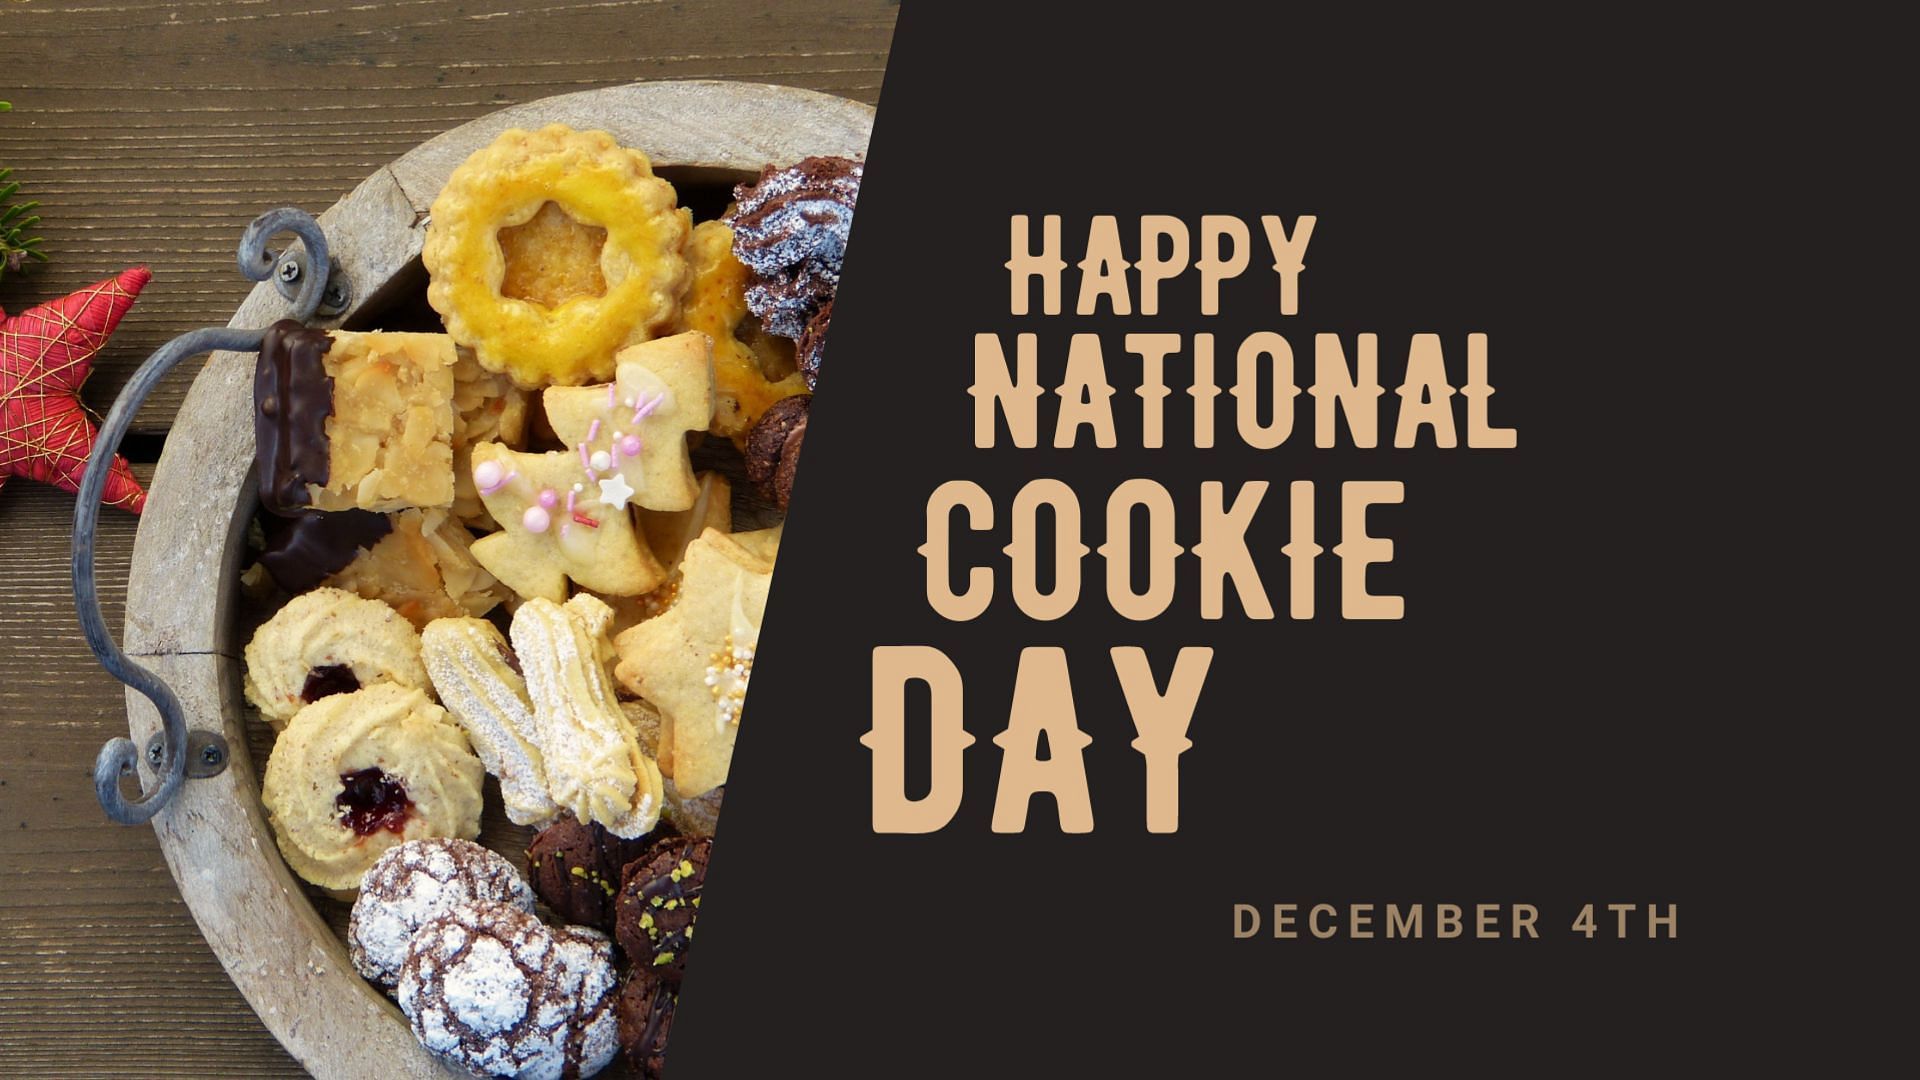 Which places are offering deals on National Cookie Day 2022? List explored